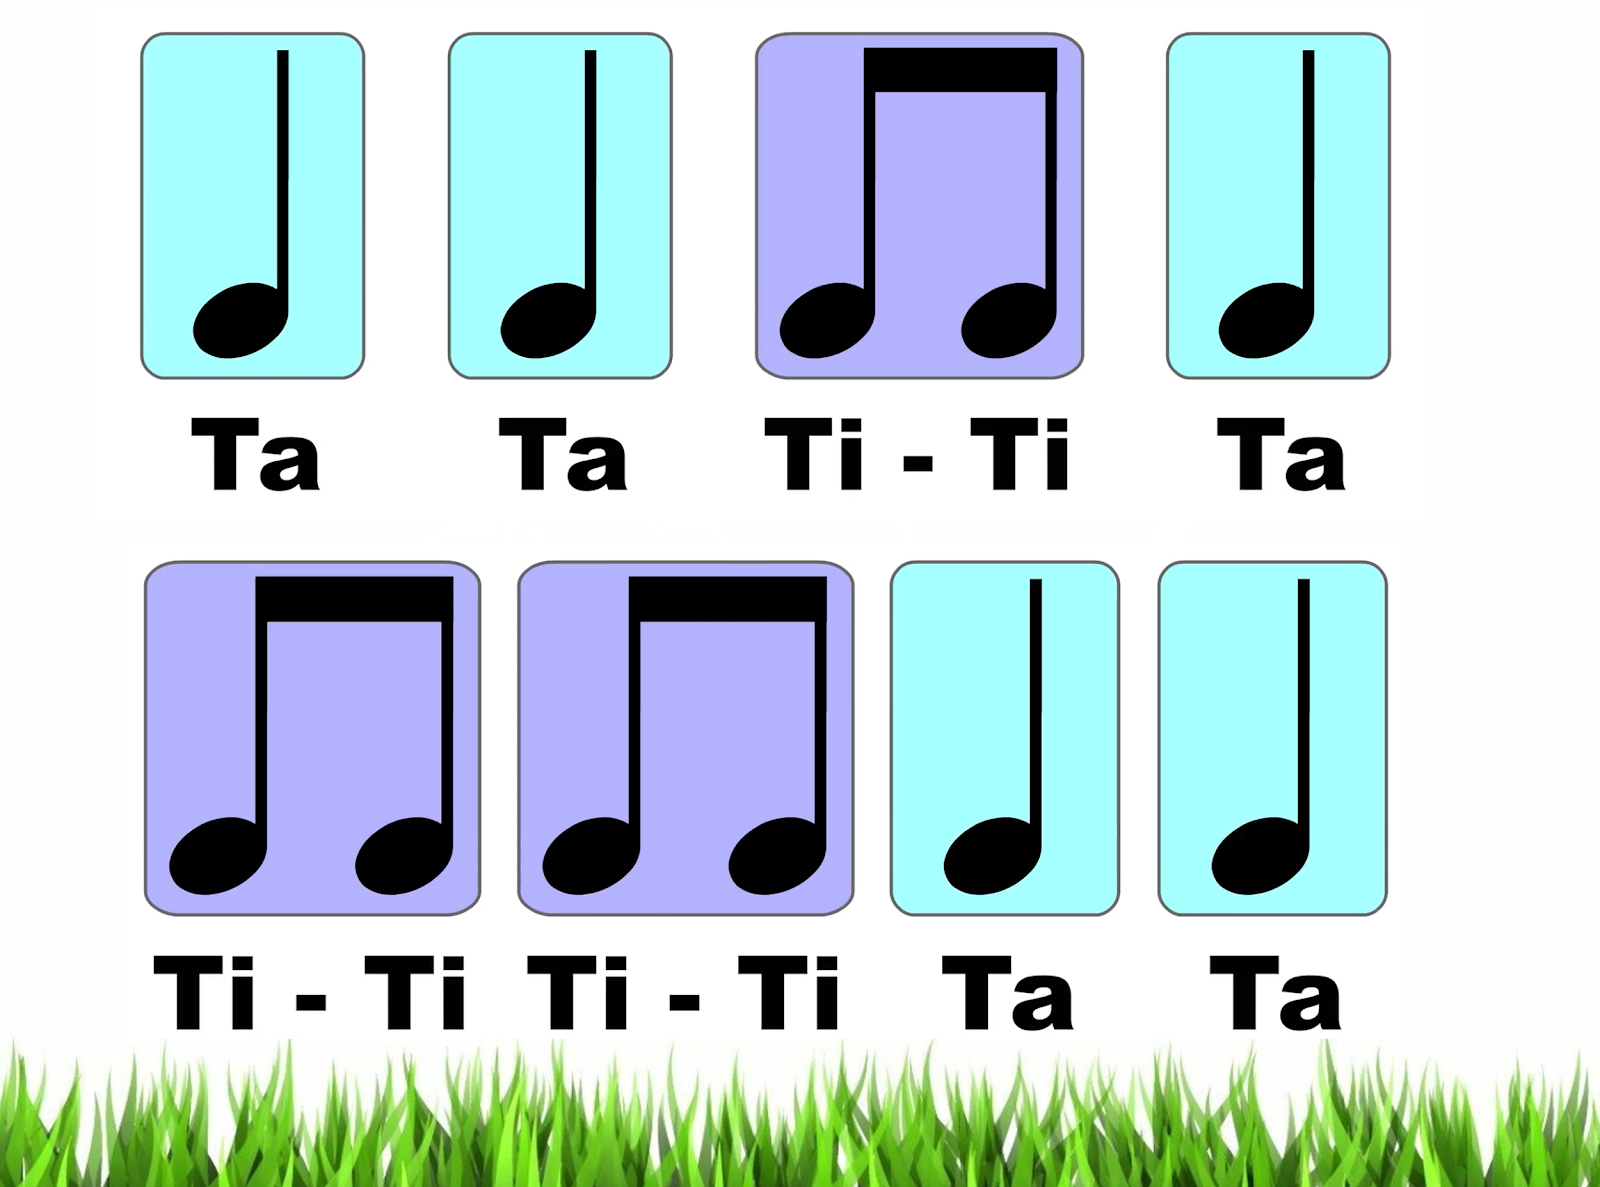 A group of musical notes

Description automatically generated